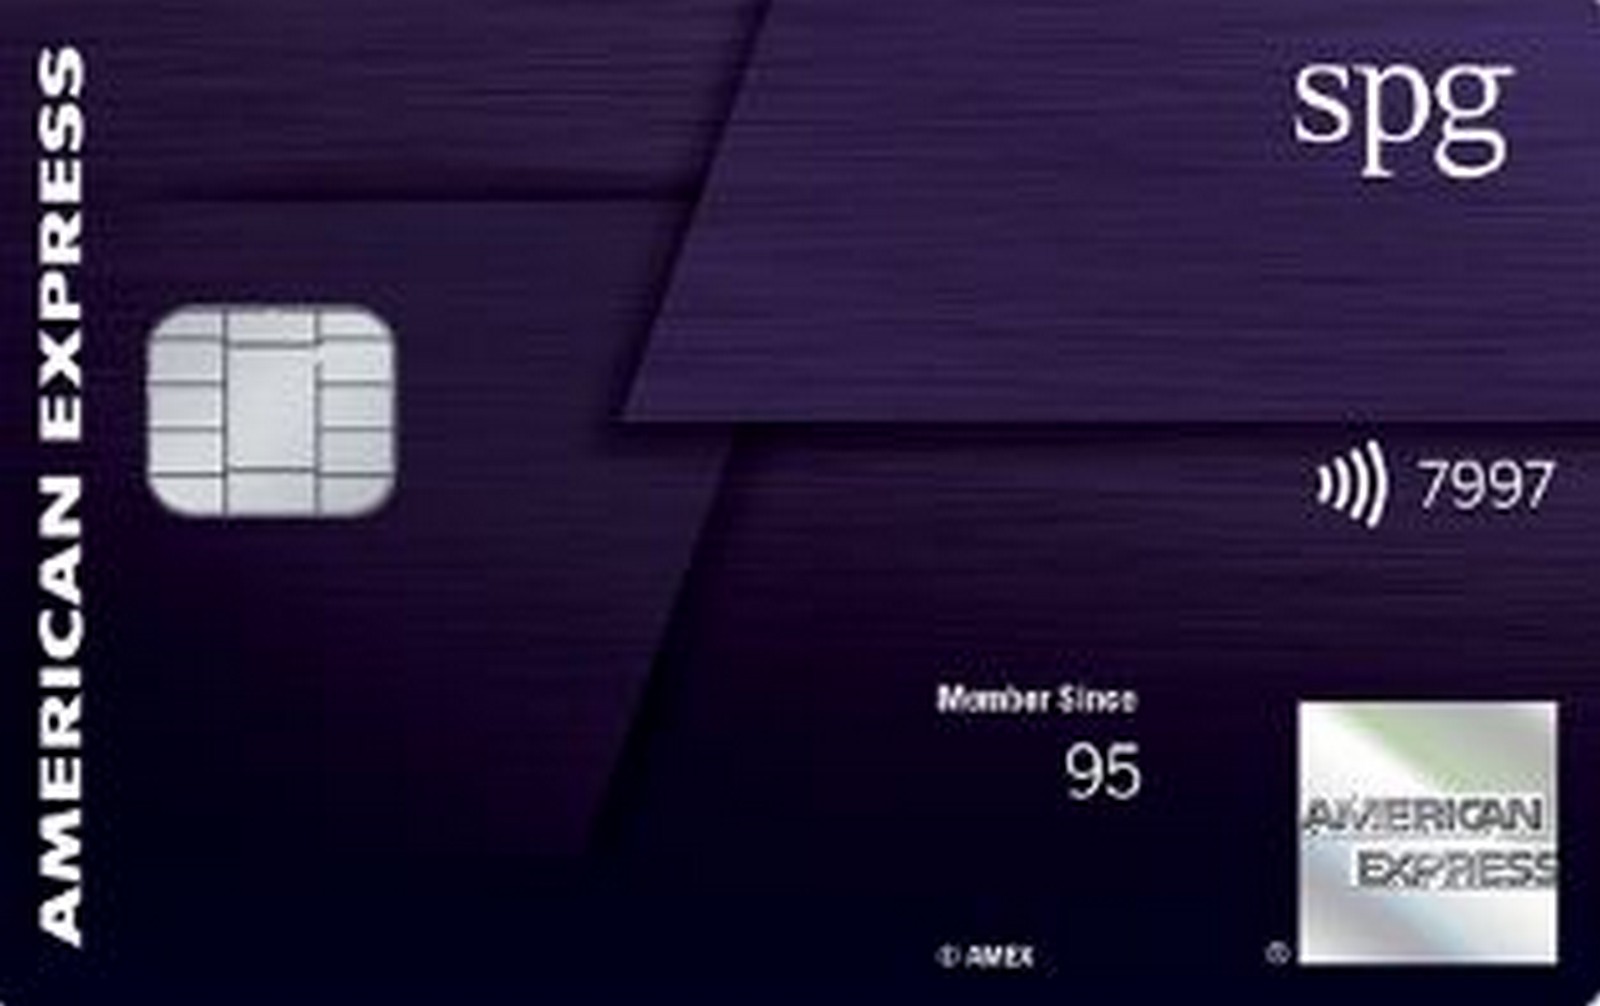 The SPG American Express Luxury Card Is Now Live, Why I Am Passing